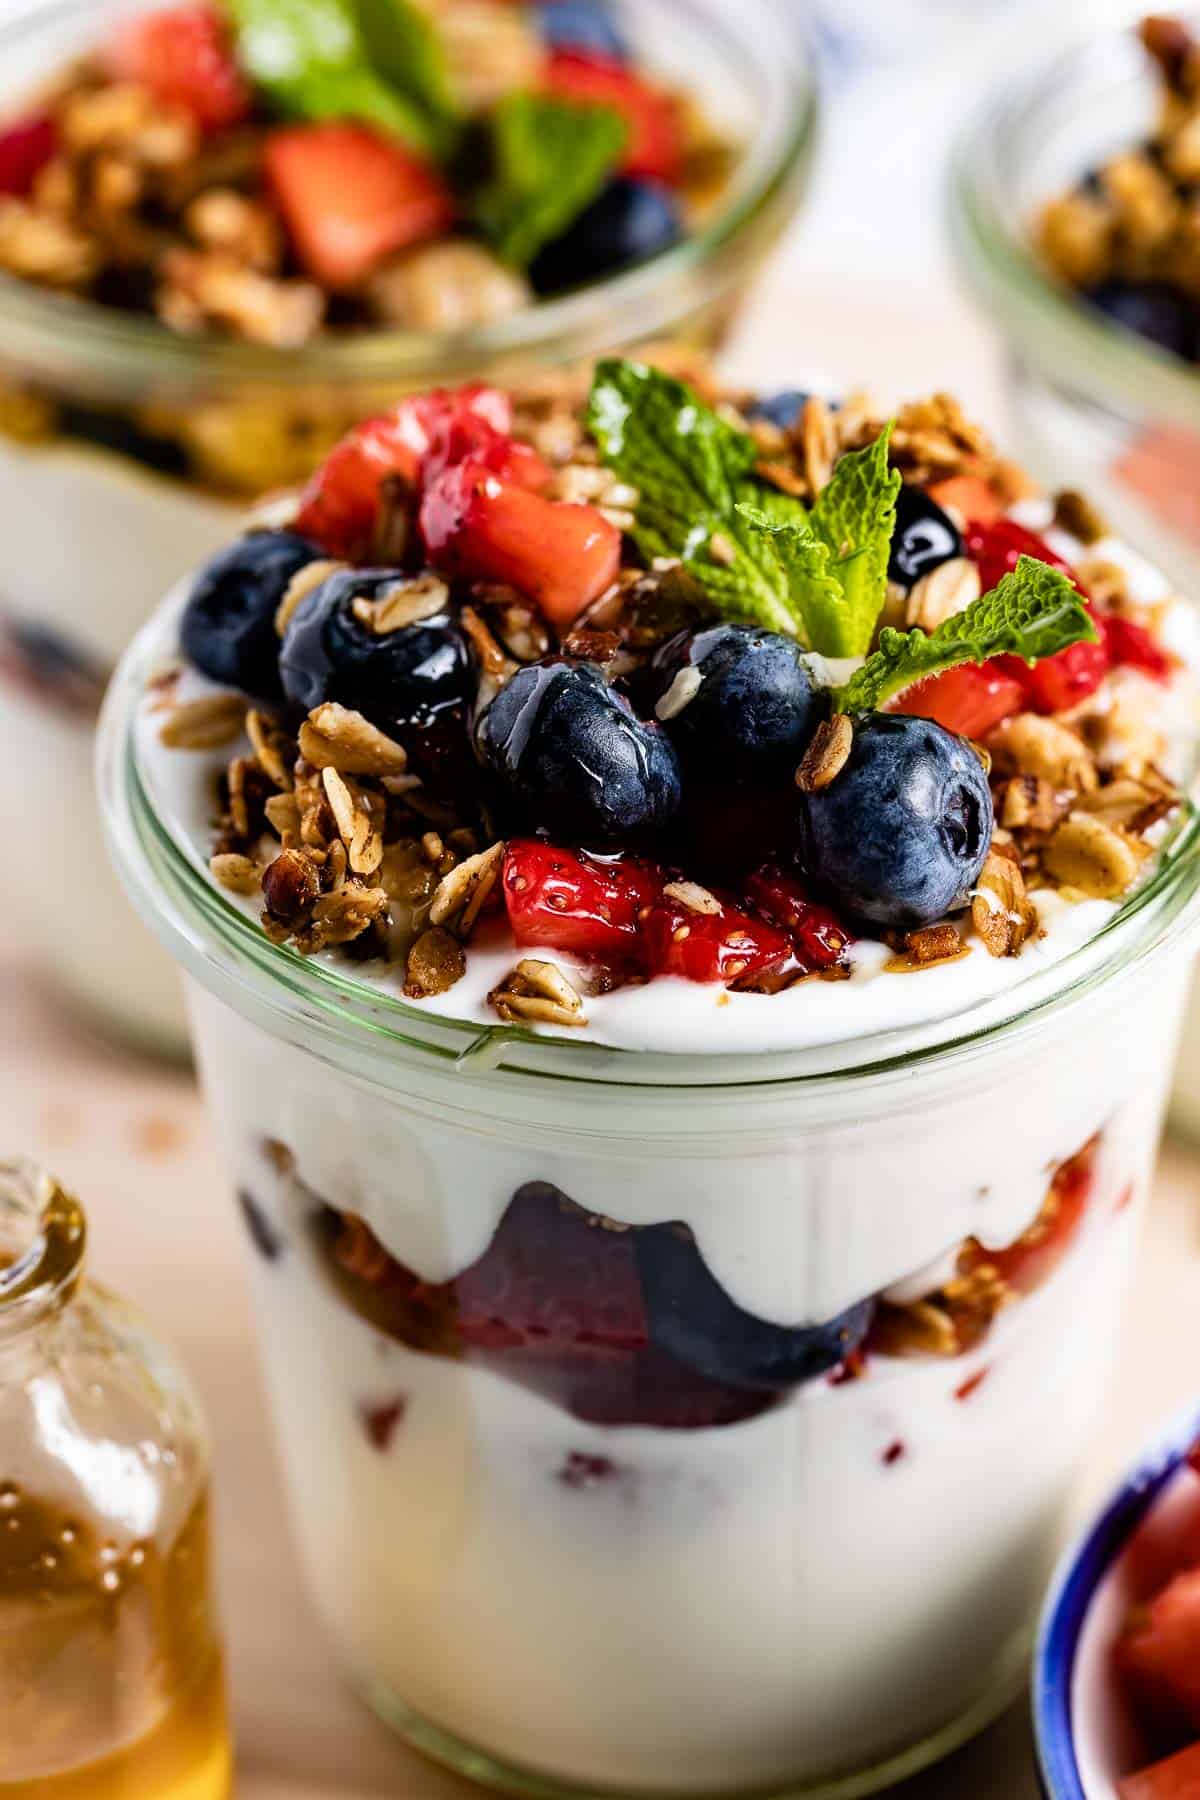 fruit and yogurt parfait garnished with mint from the front view